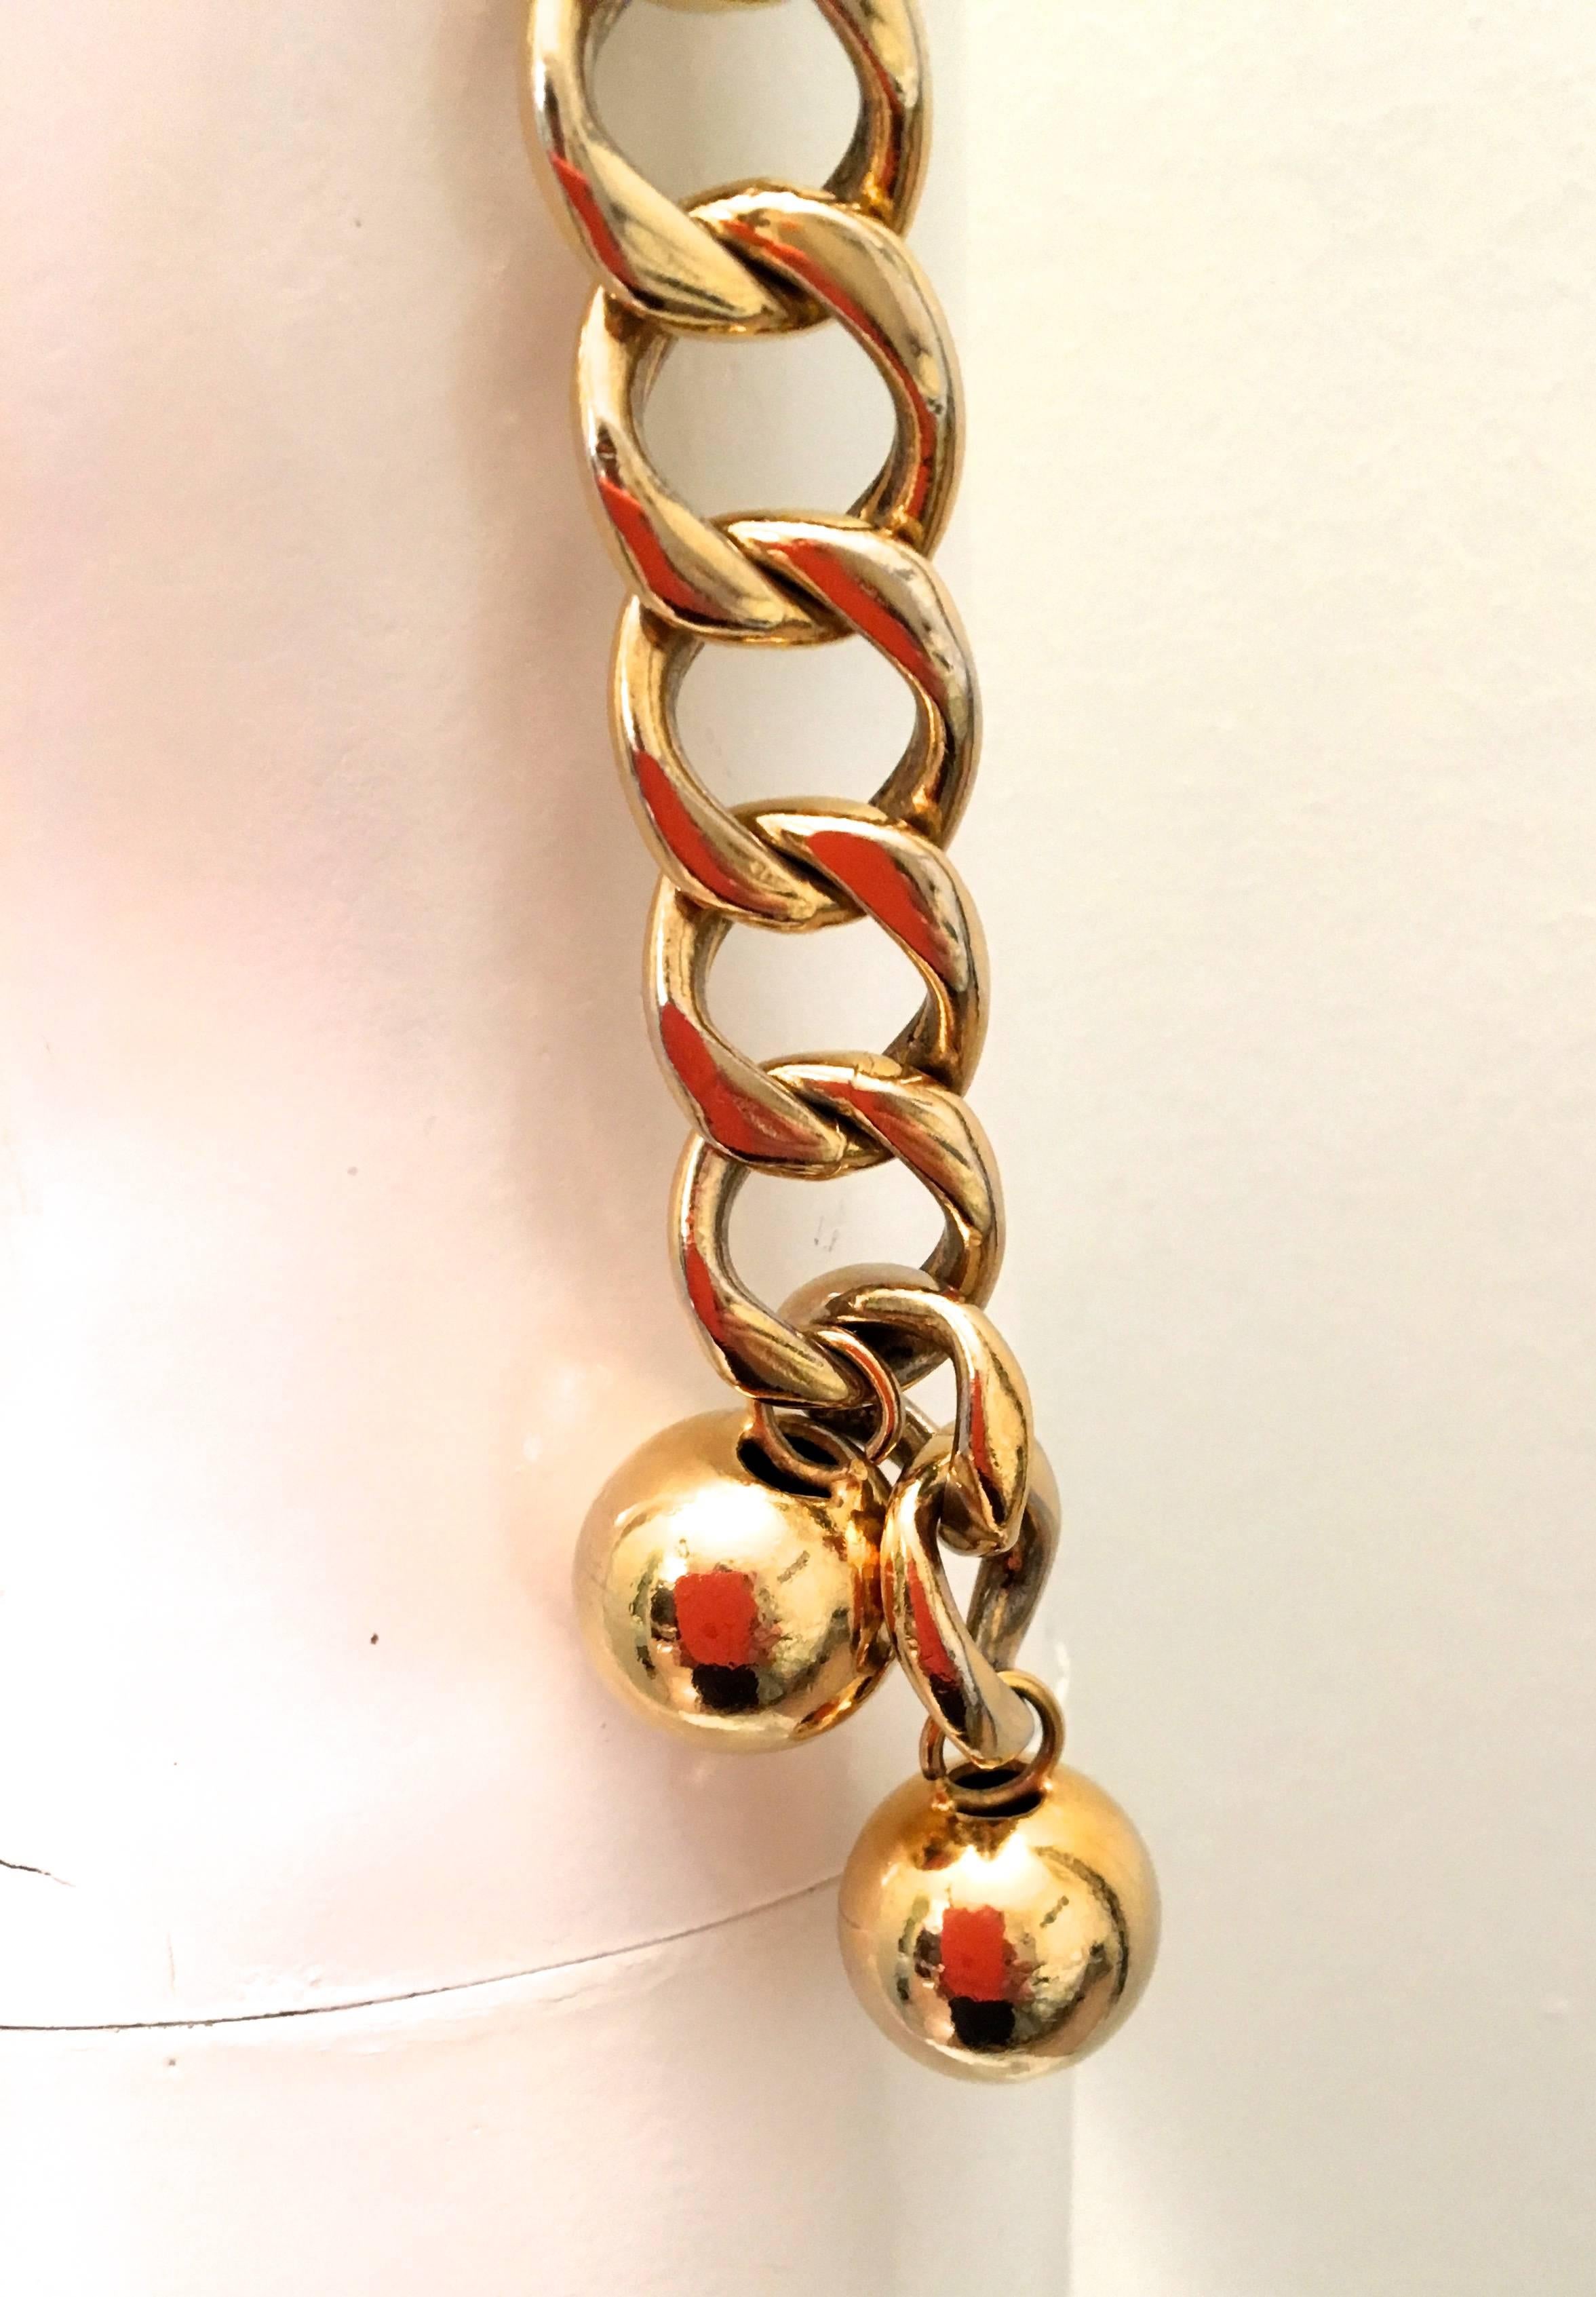 Presented here is a Chanel gold tone metal chain belt. The belt is comprised of links that are 1 inch long and .8 inches wide. One one side of the belt, there are two rows of links and the other side has a singular row depending upon the style of